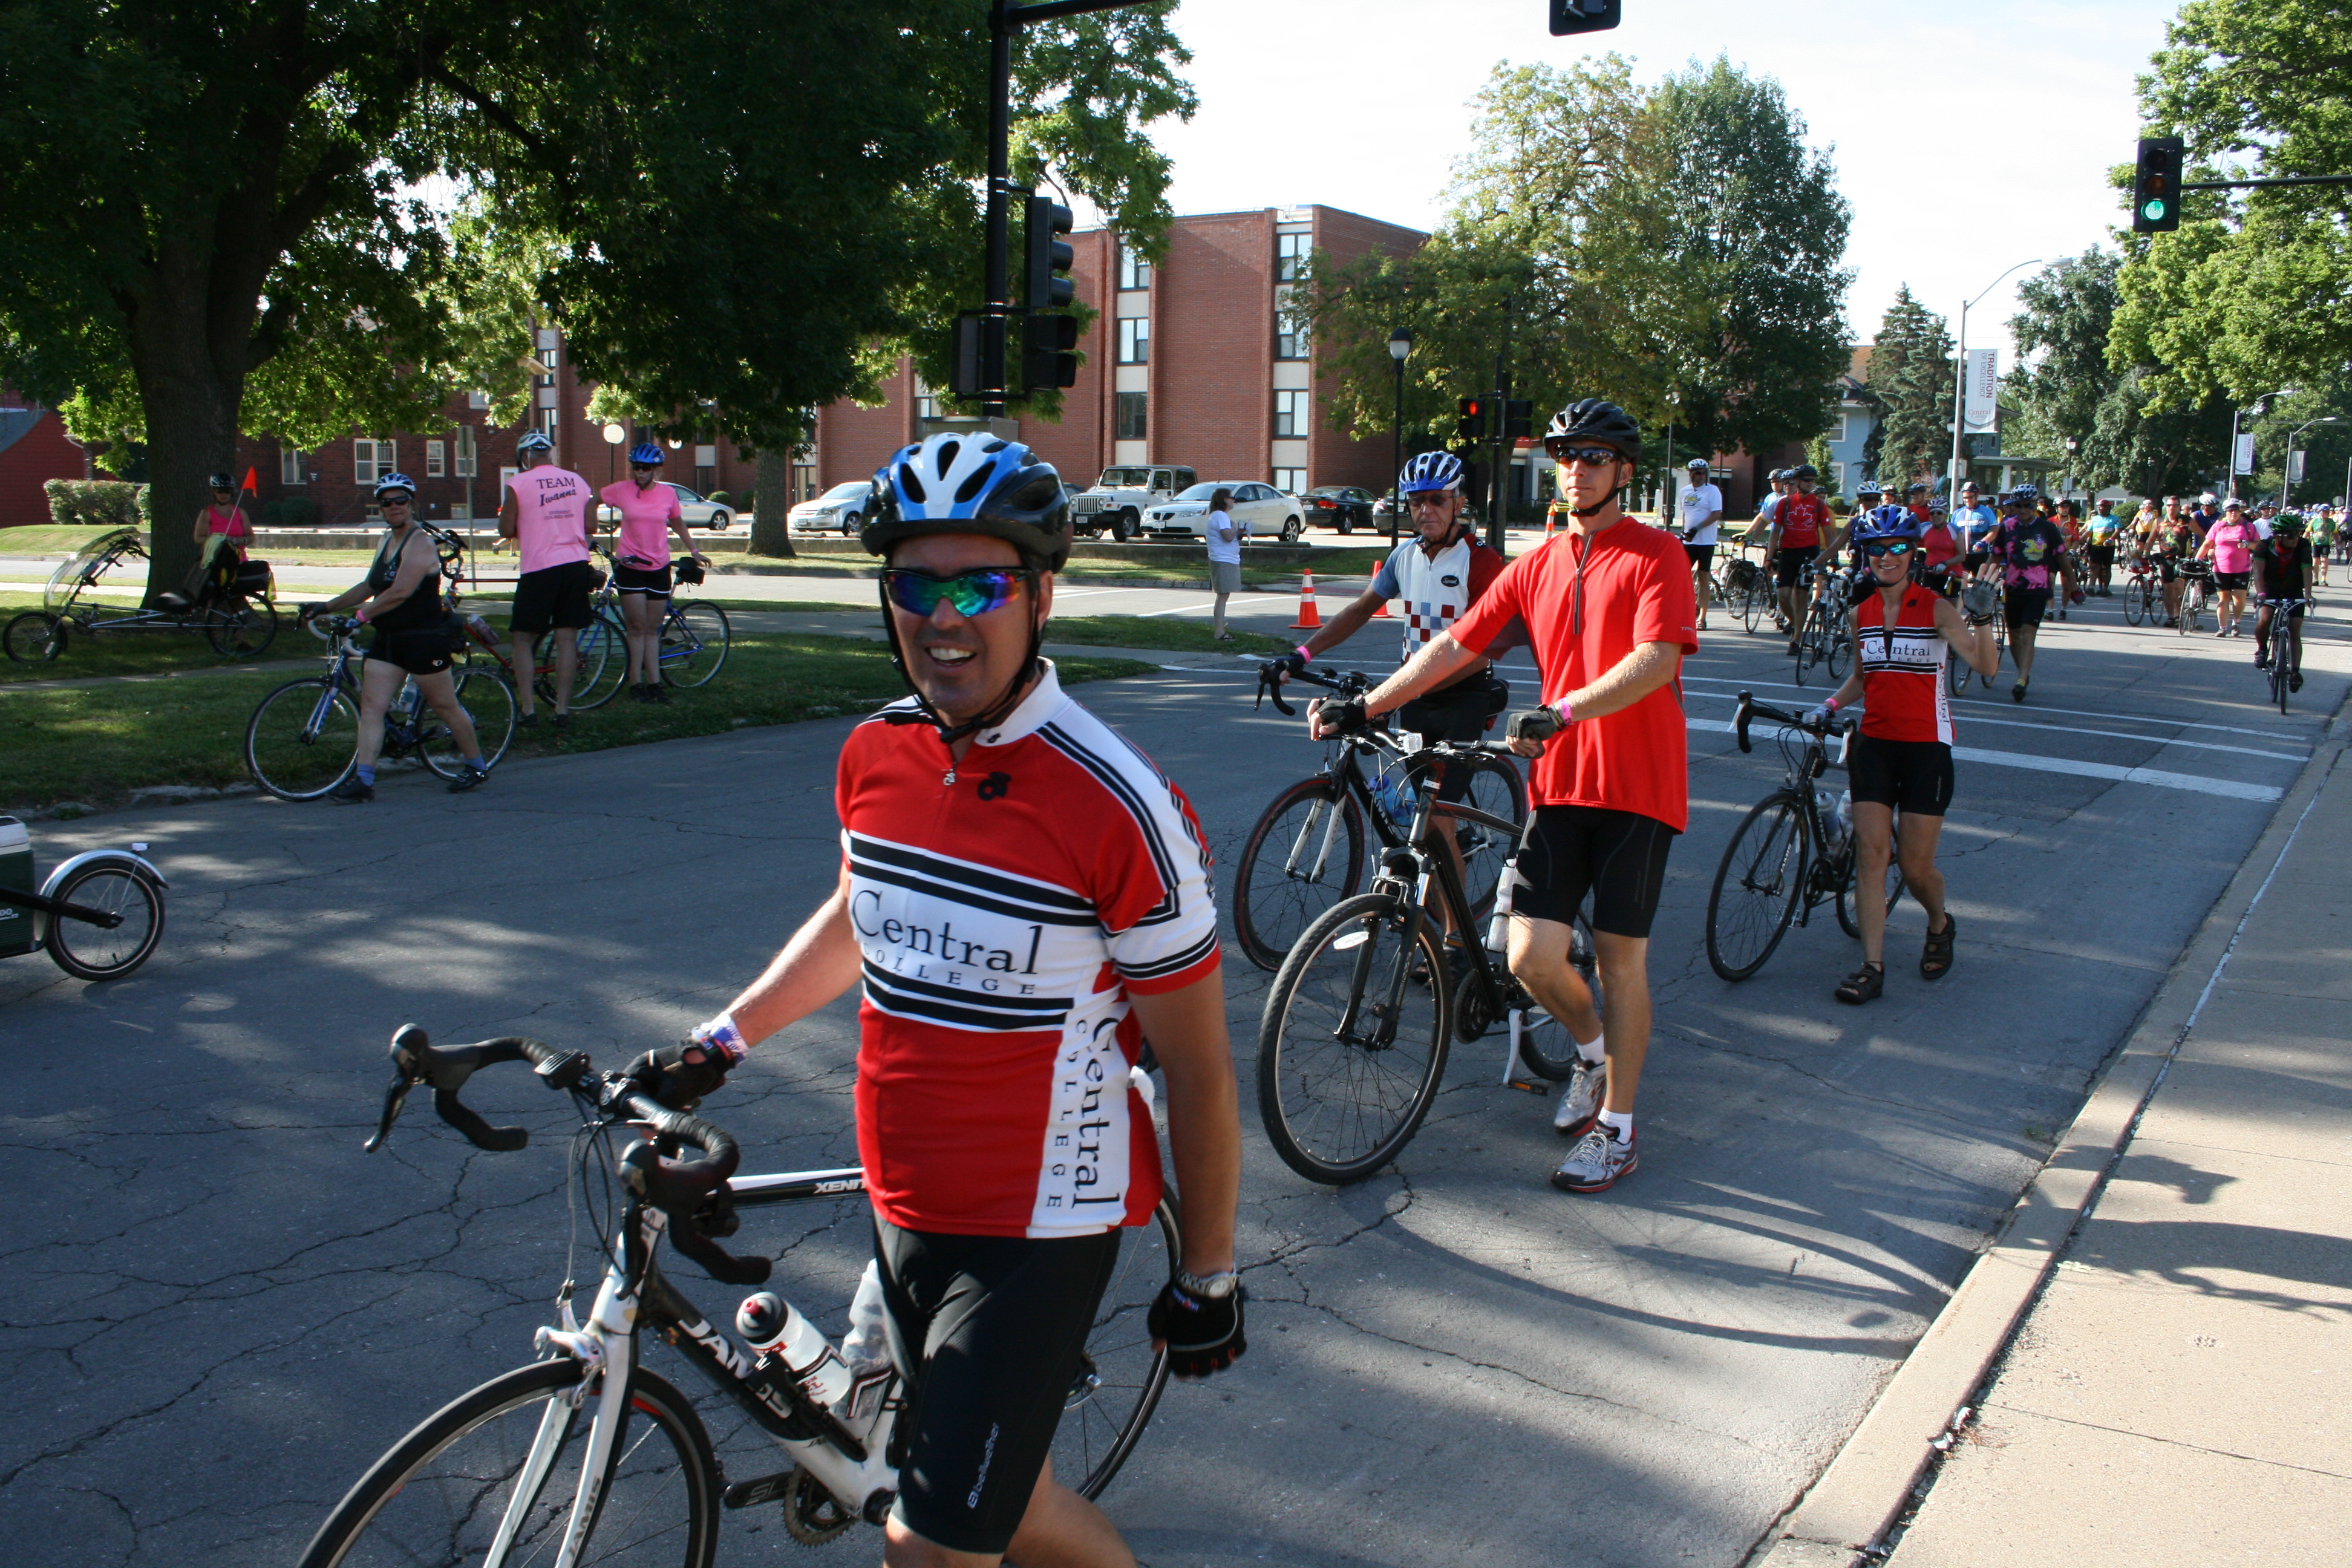 Invasion! Two bicycle rides hit campus